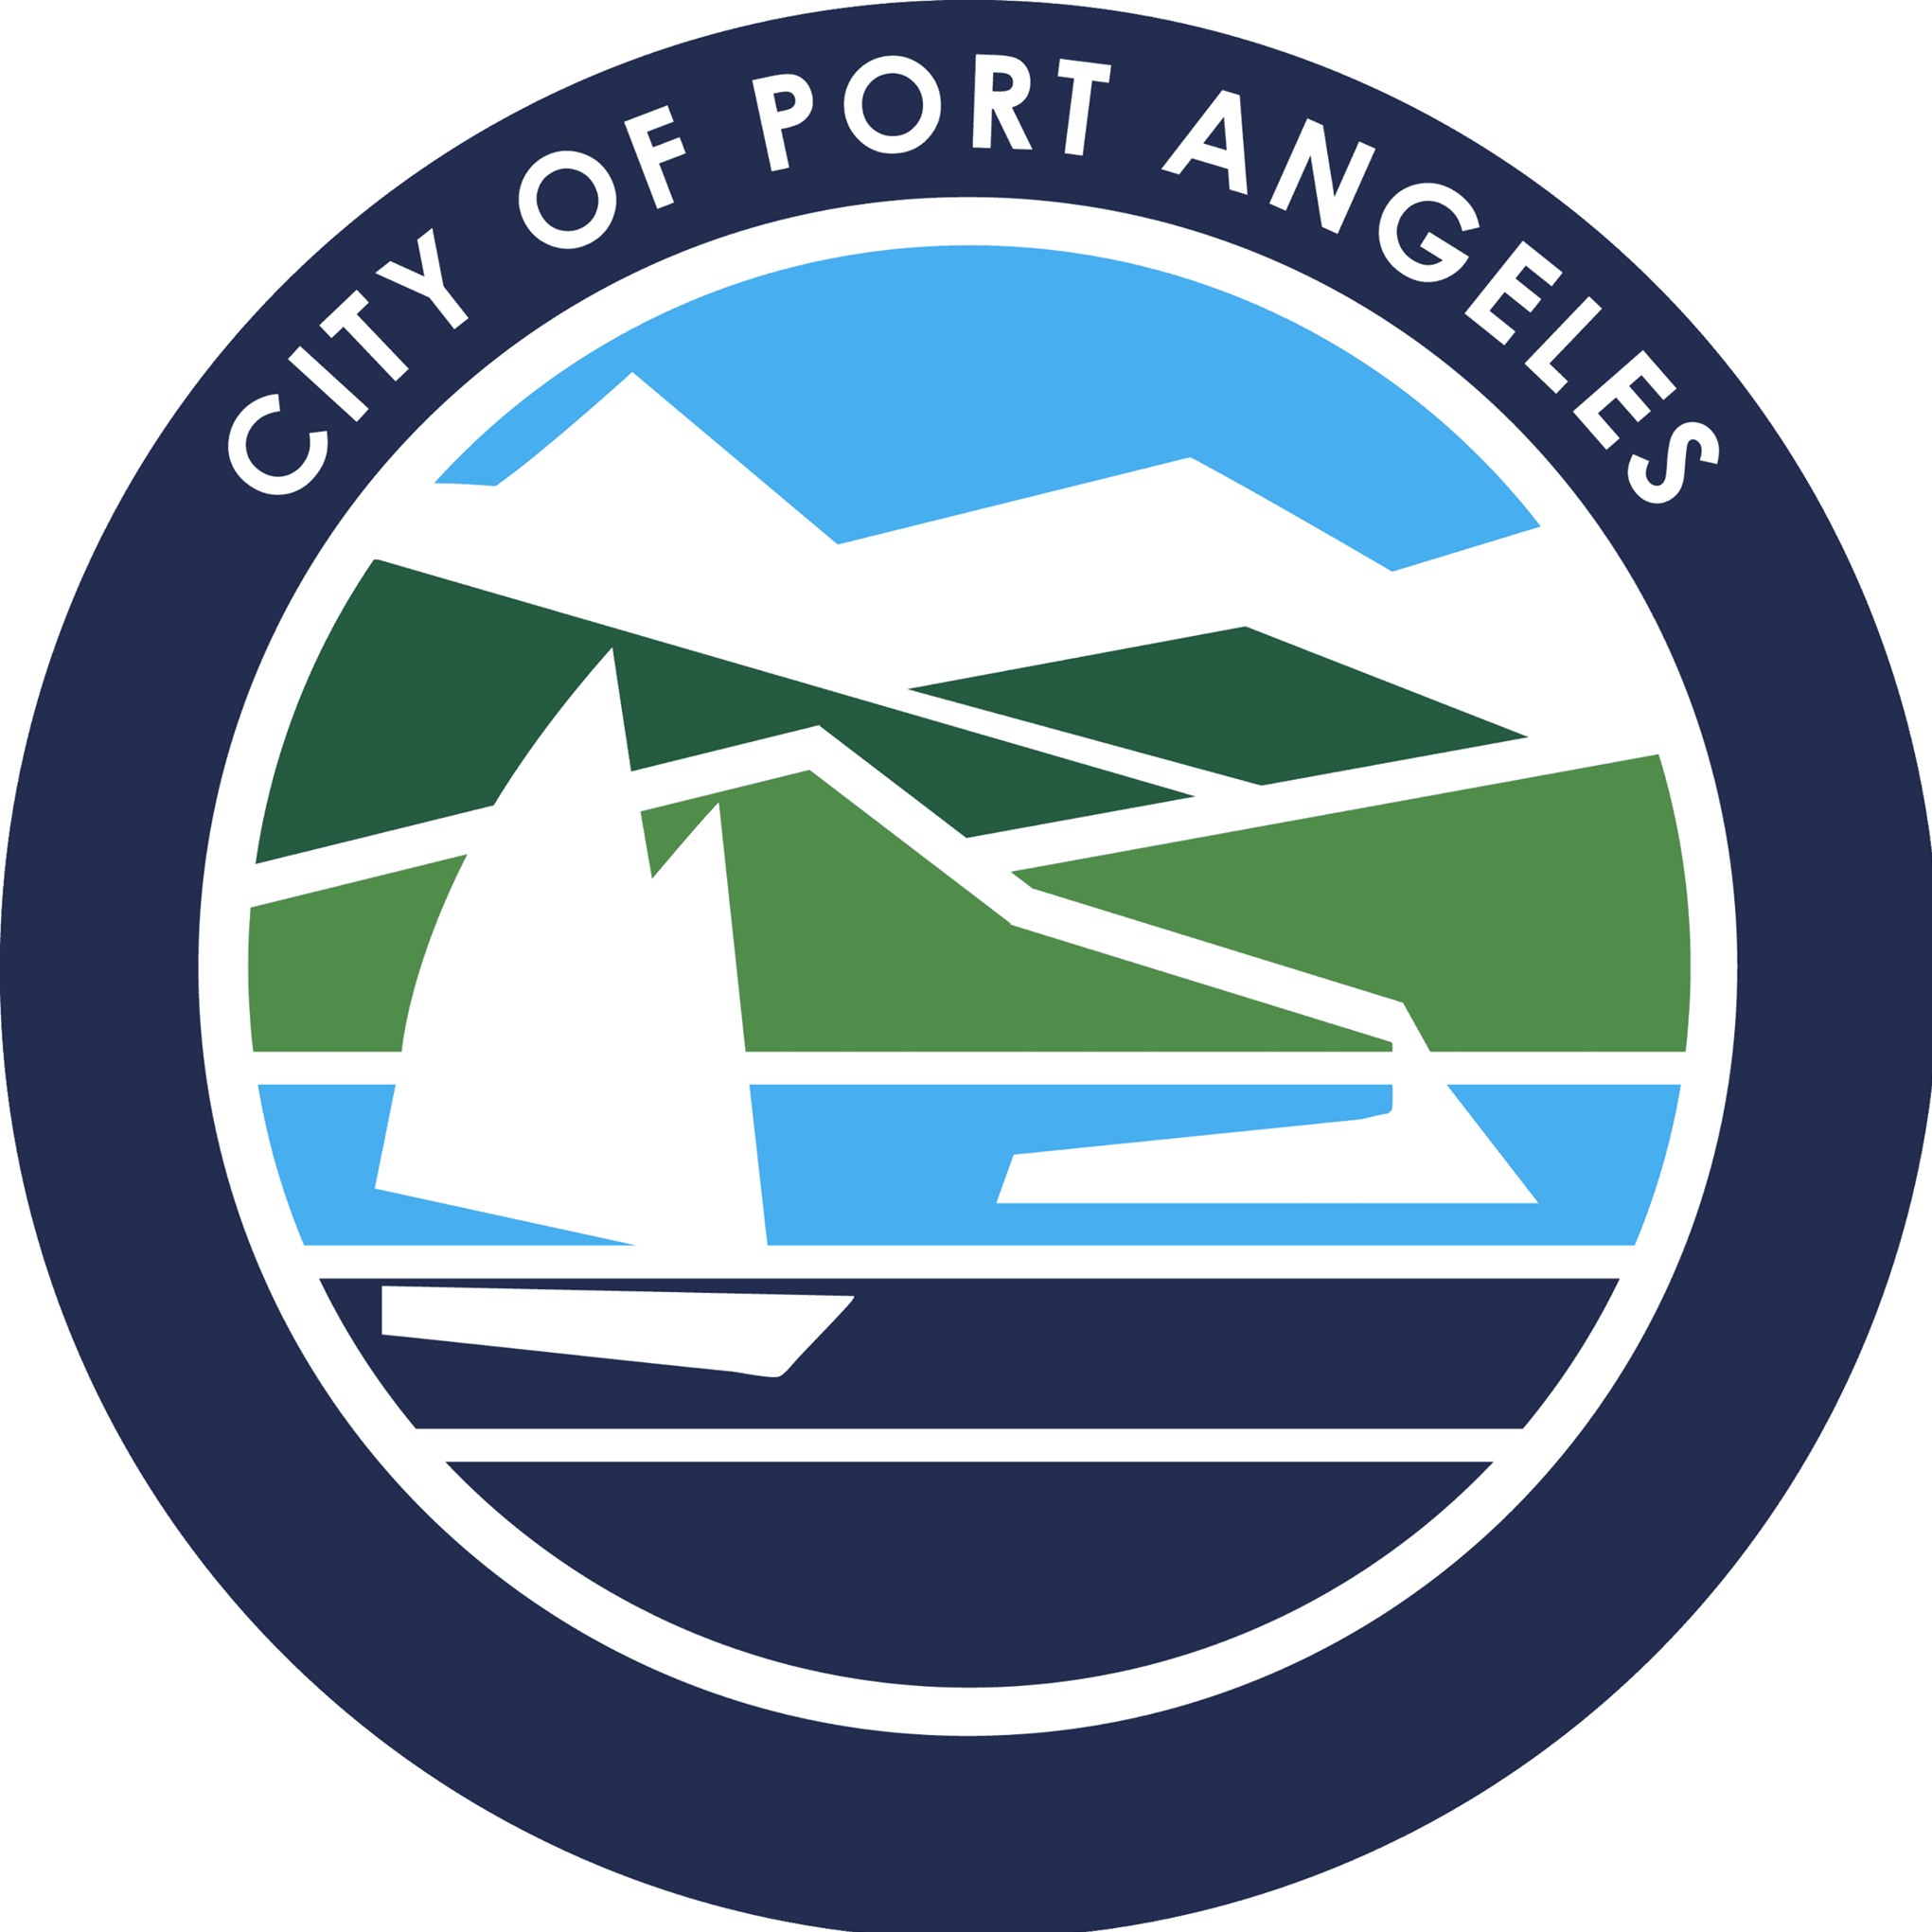 Round logo featuring seal of the City of Port Angeles